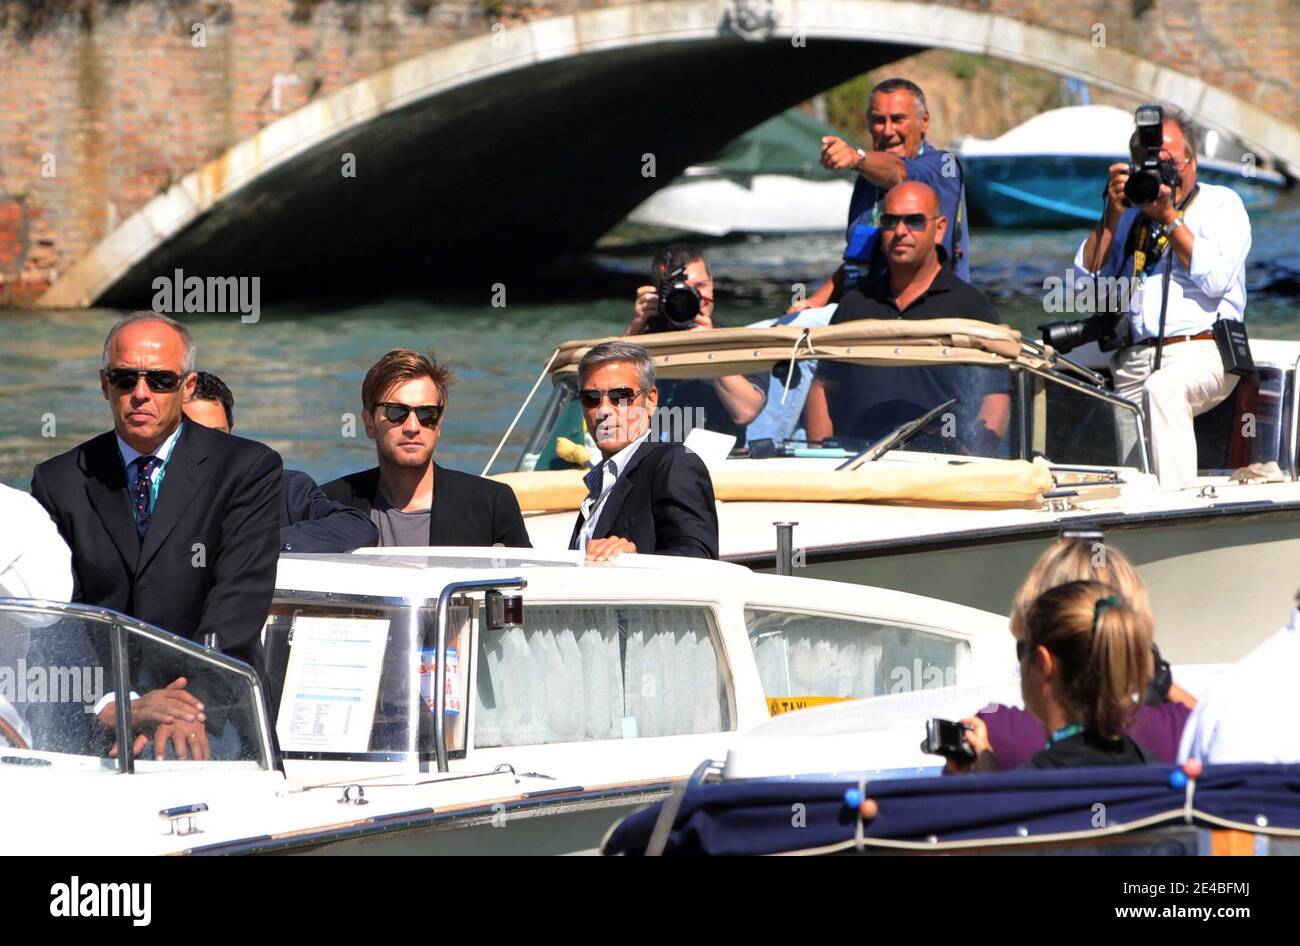 Ewan McGregor and George Clooney arrive at the Palazzo del Casino for the 66th Venice Film Festival in Venice, Italy on September 8, 2009. Photo by ABACAPRESS.COM Stock Photo